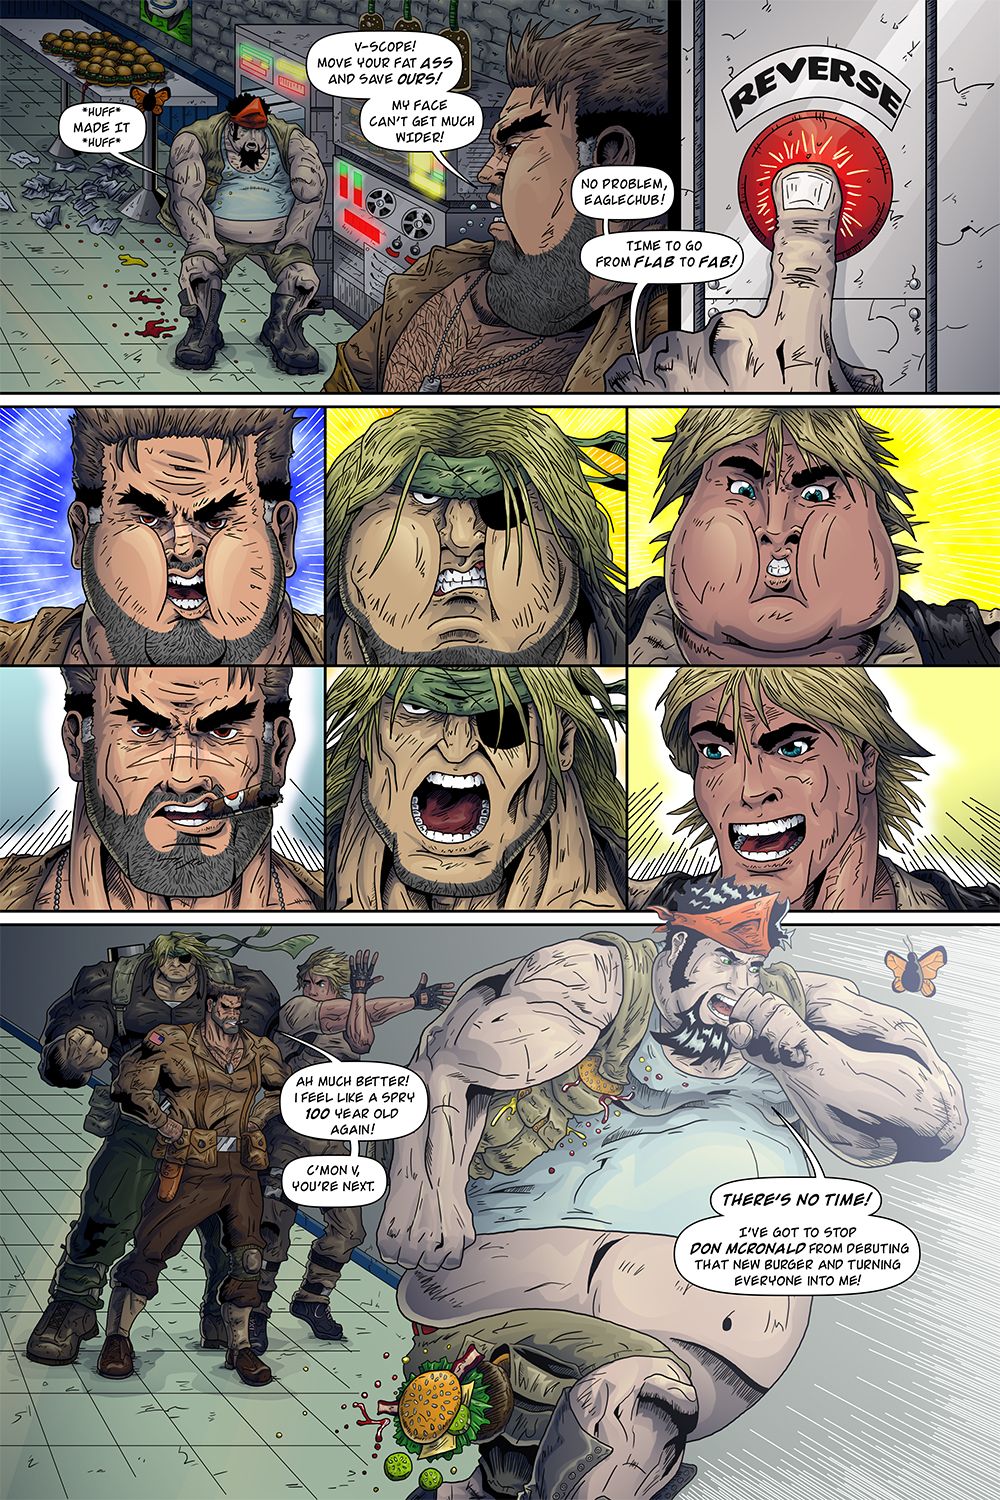 MISSION 009: PAGE 17 “FLAB TO FAB”